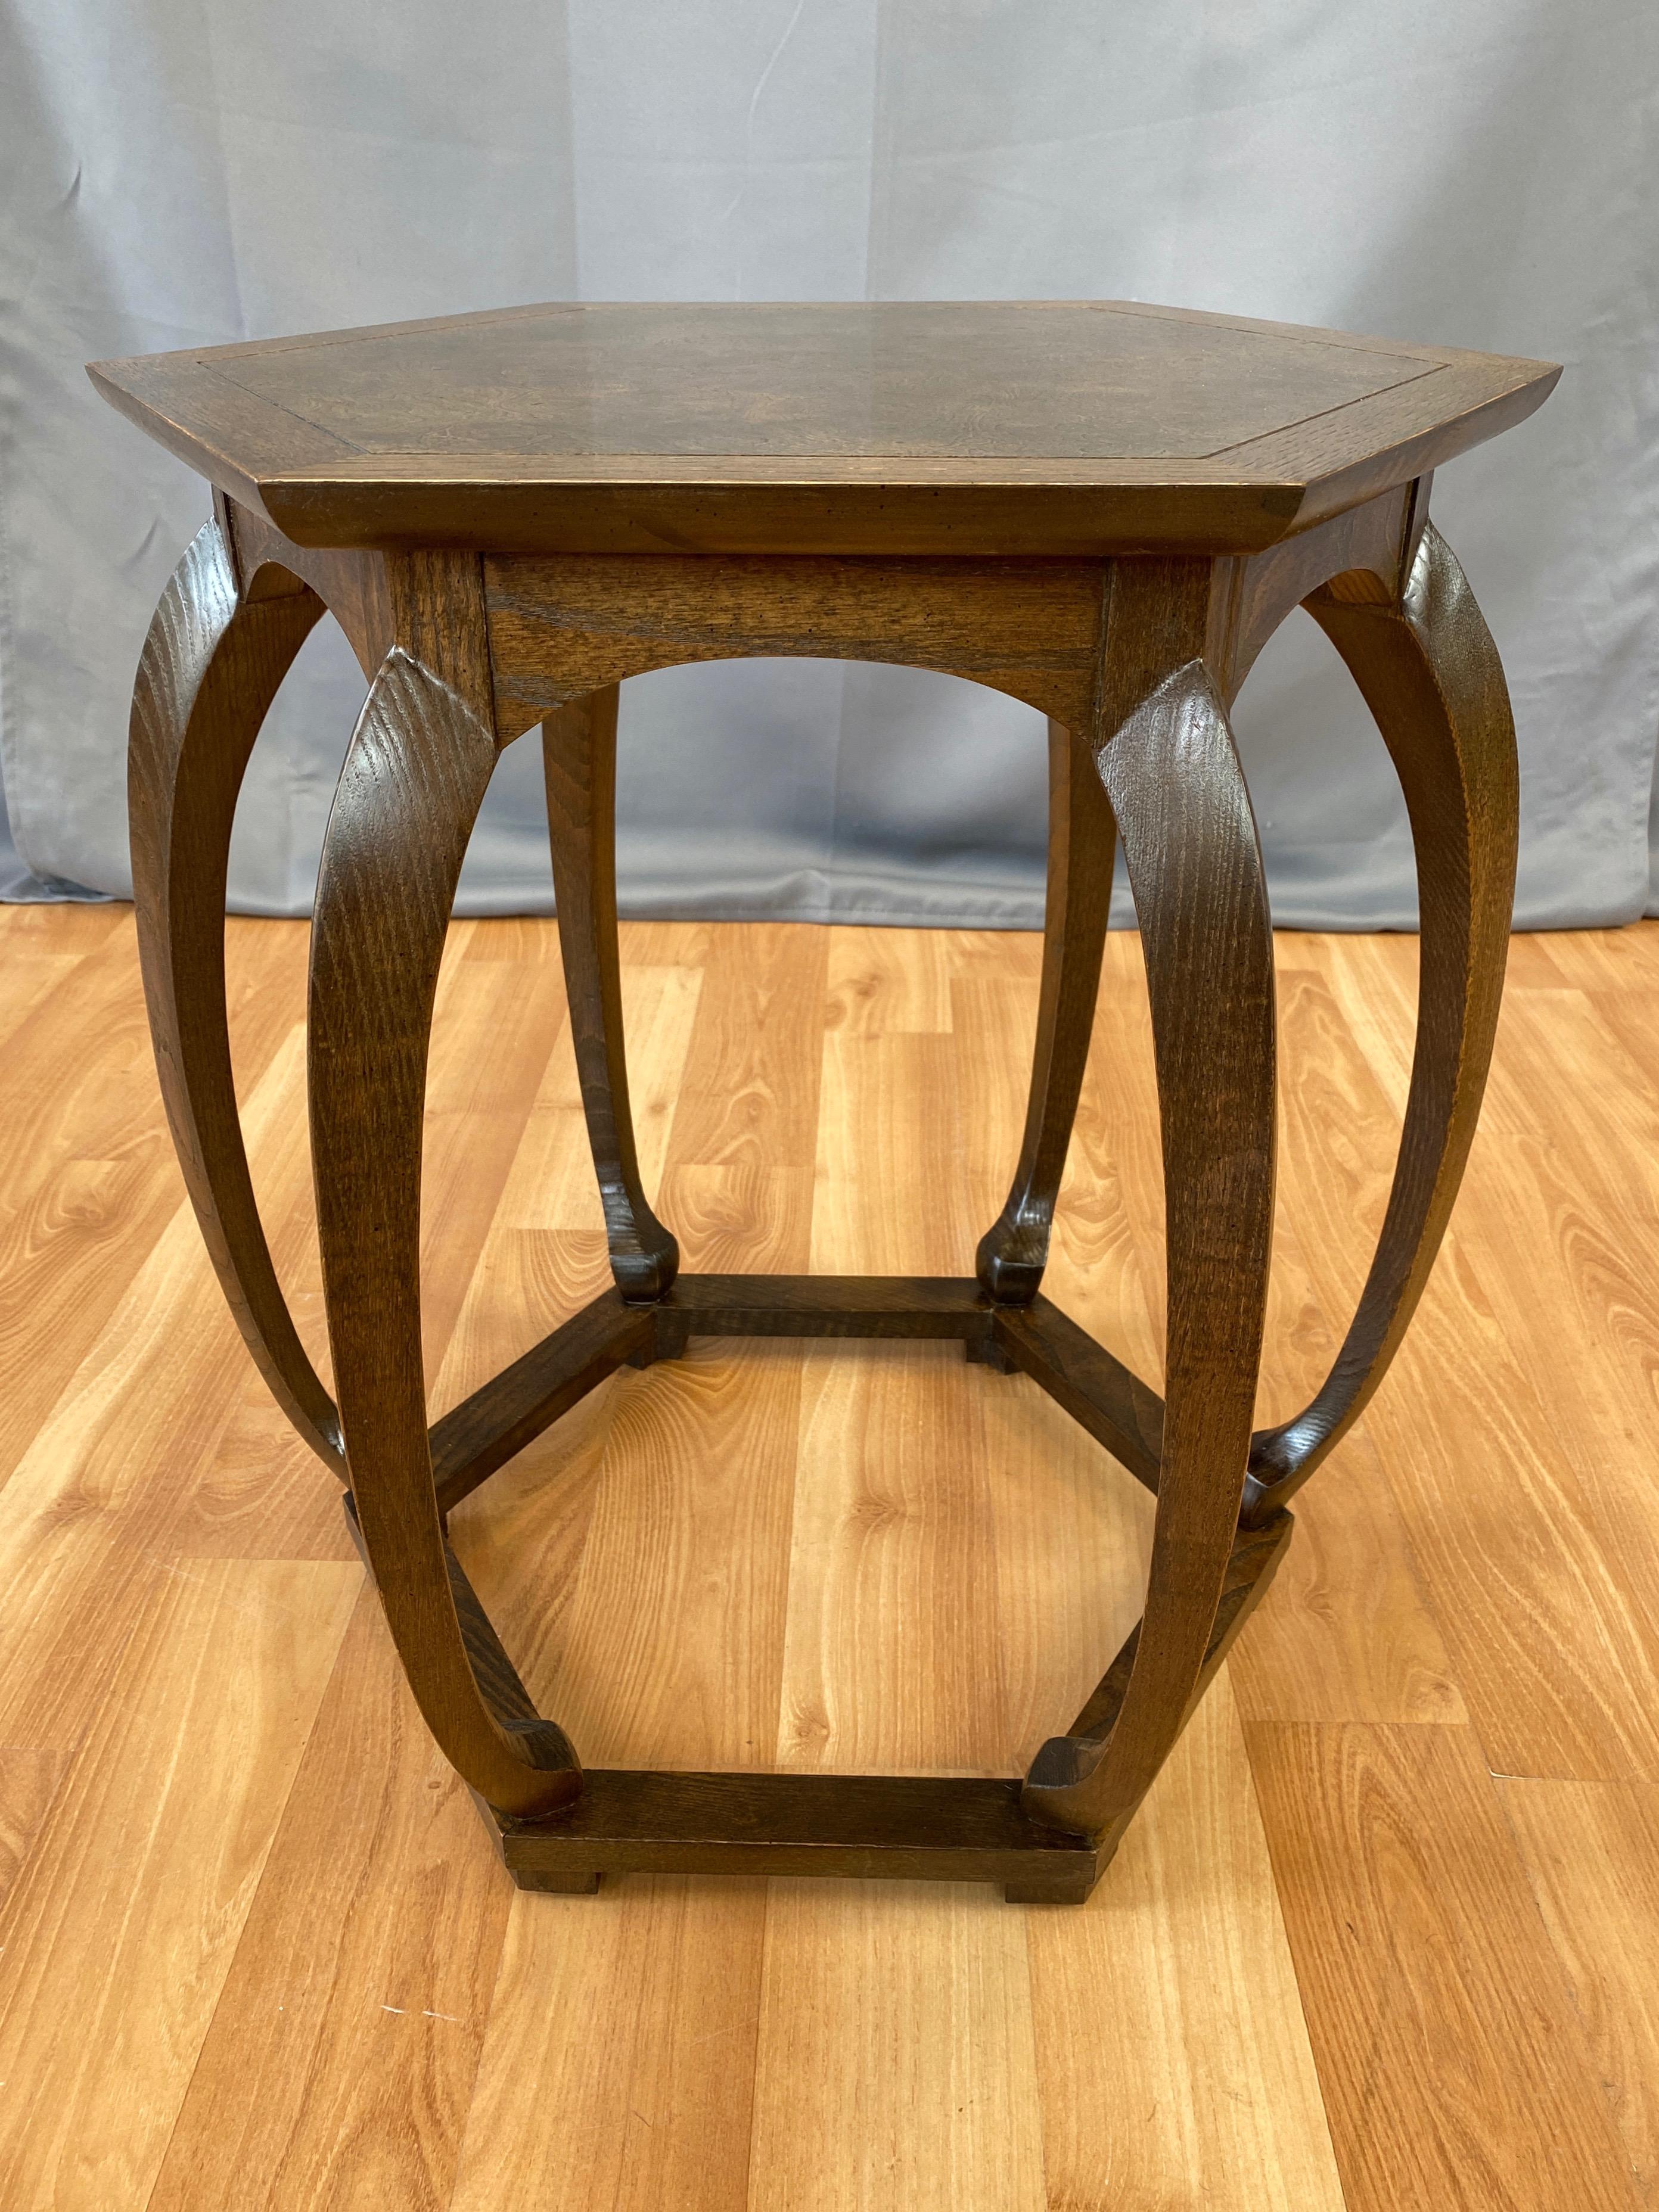 A 1960s Asian-inspired hexagonal oak side table or stool with burl wood top by Baker Furniture, likely from Michael Taylor's timeless Far East Collection for the company.

Well crafted and perfectly proportioned solid oak silhouette distinguished